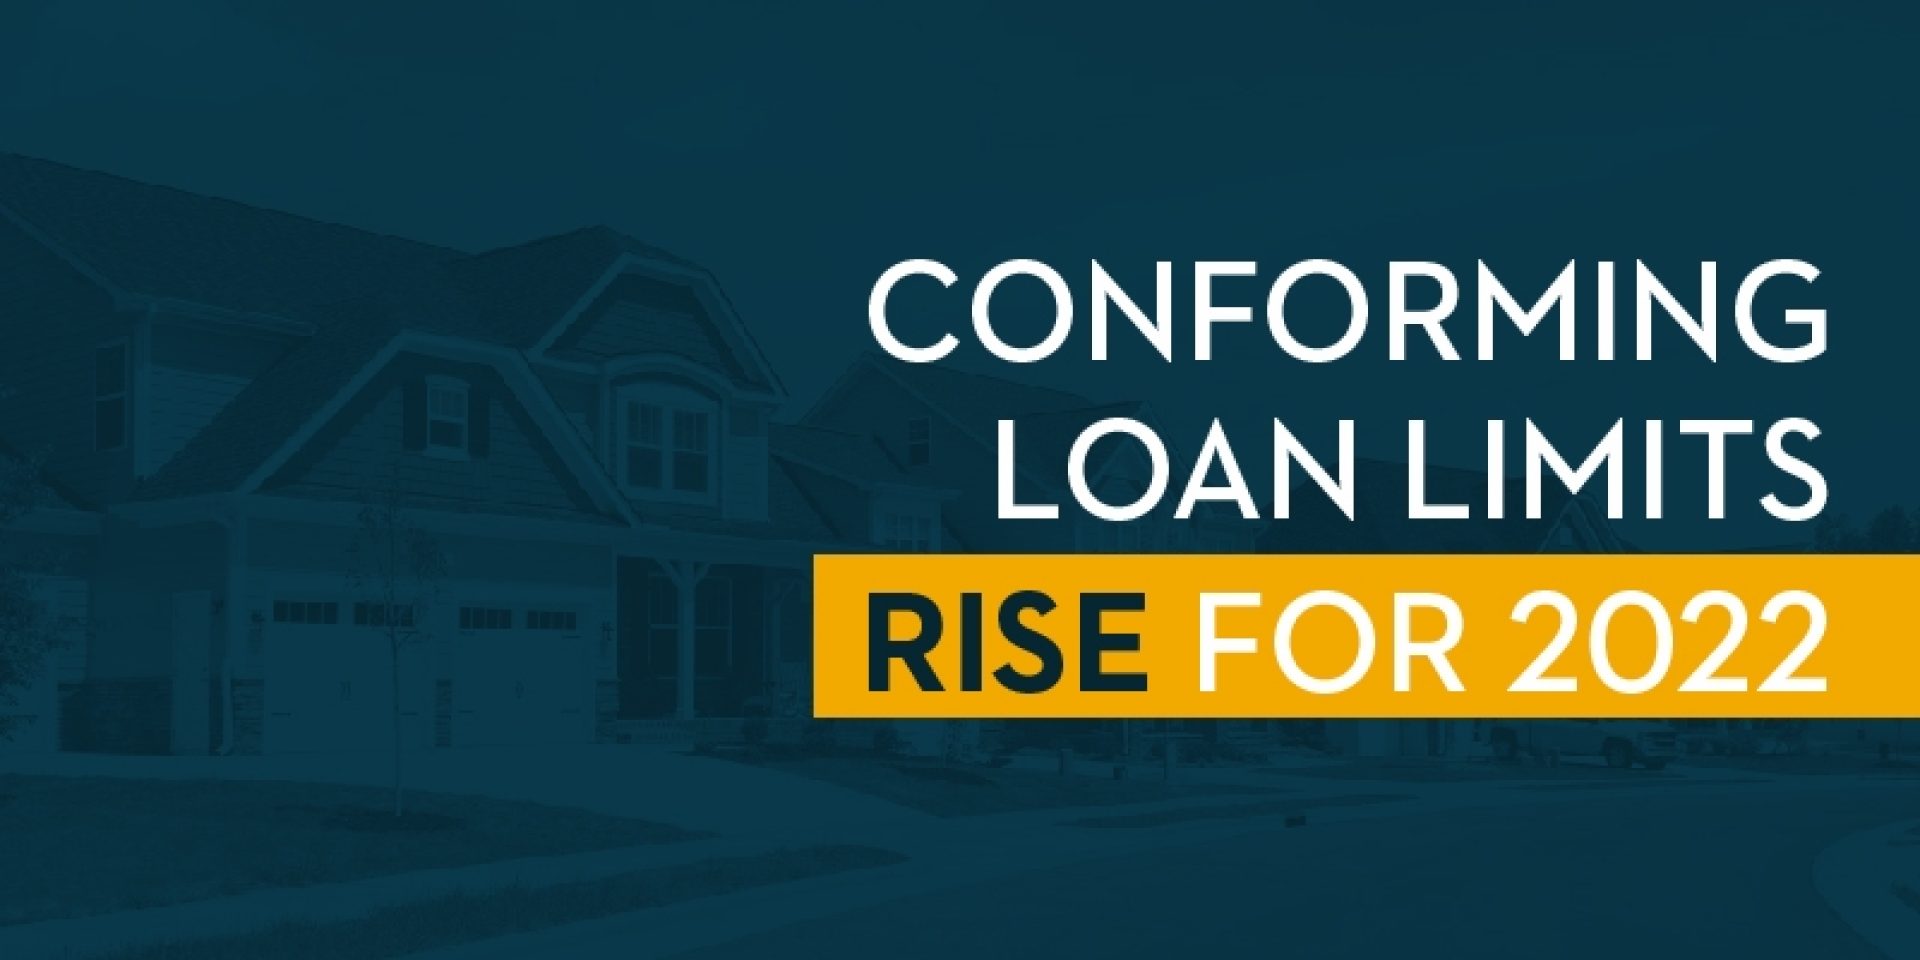 Conforming Loan Limits Rise for 2022 The Servion Group